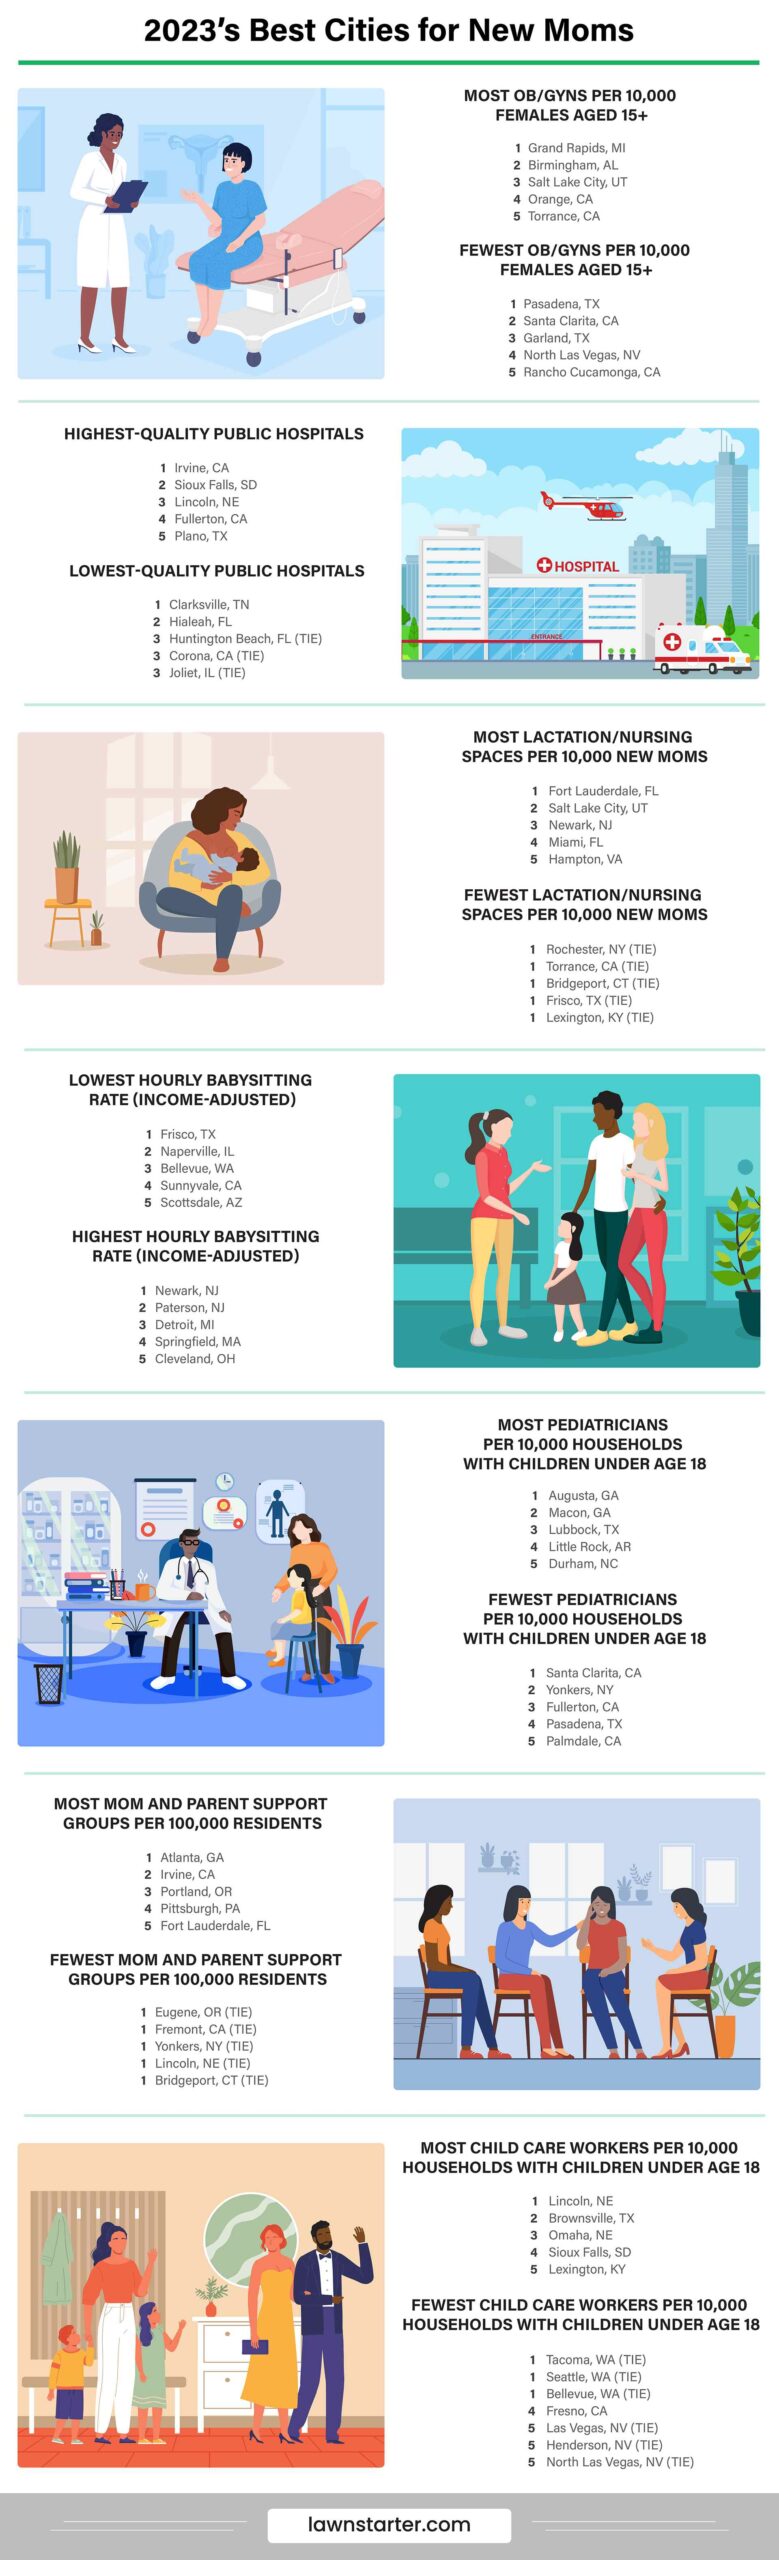 best cities for new moms infographic